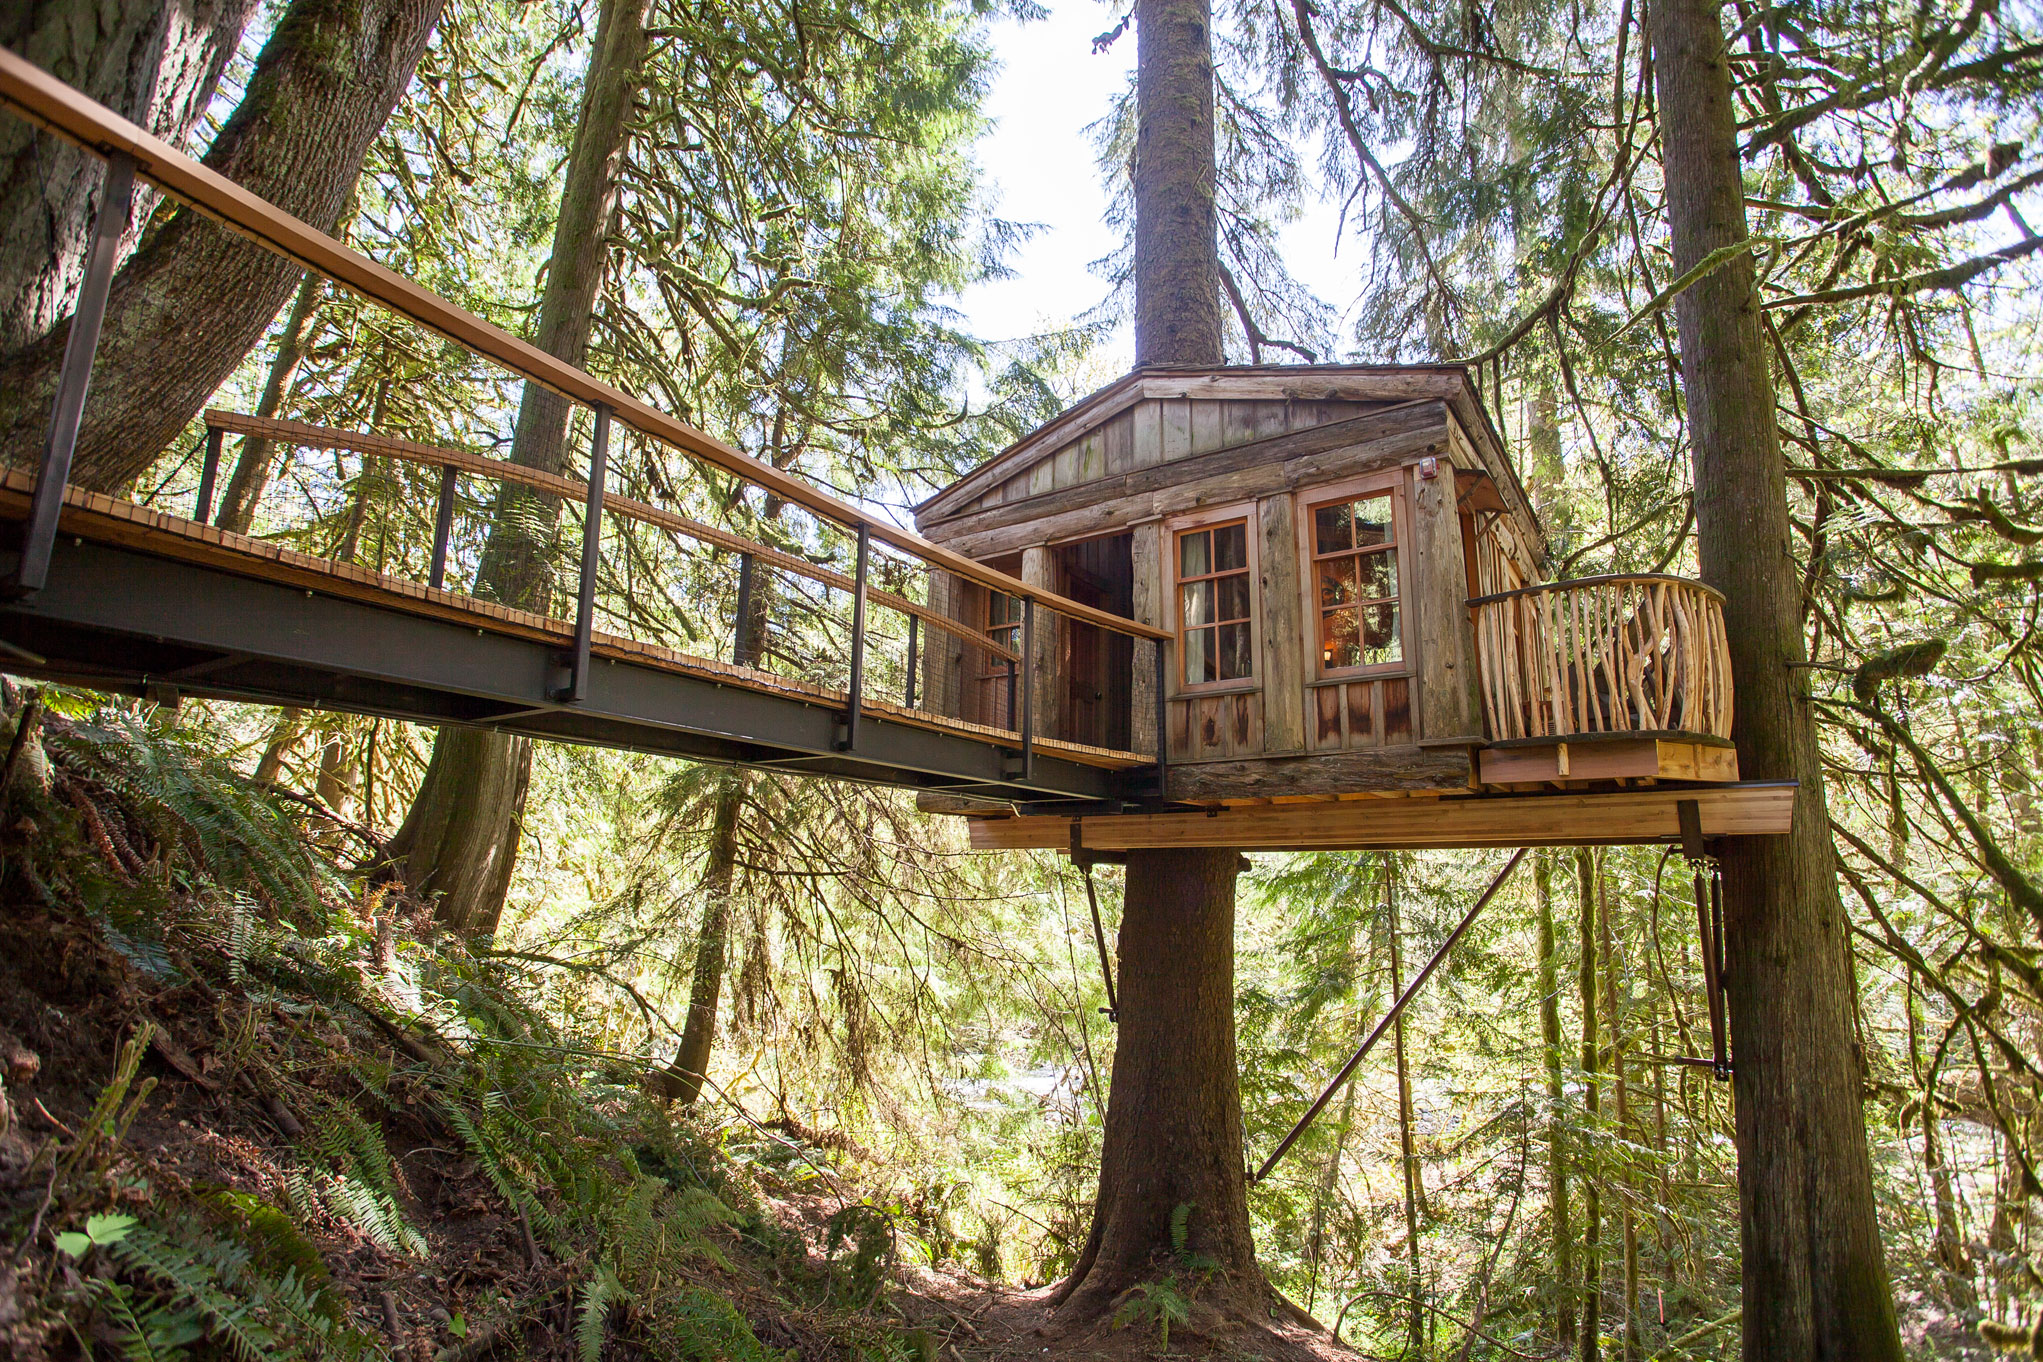 Wooden tree house situated in the middle of the forest